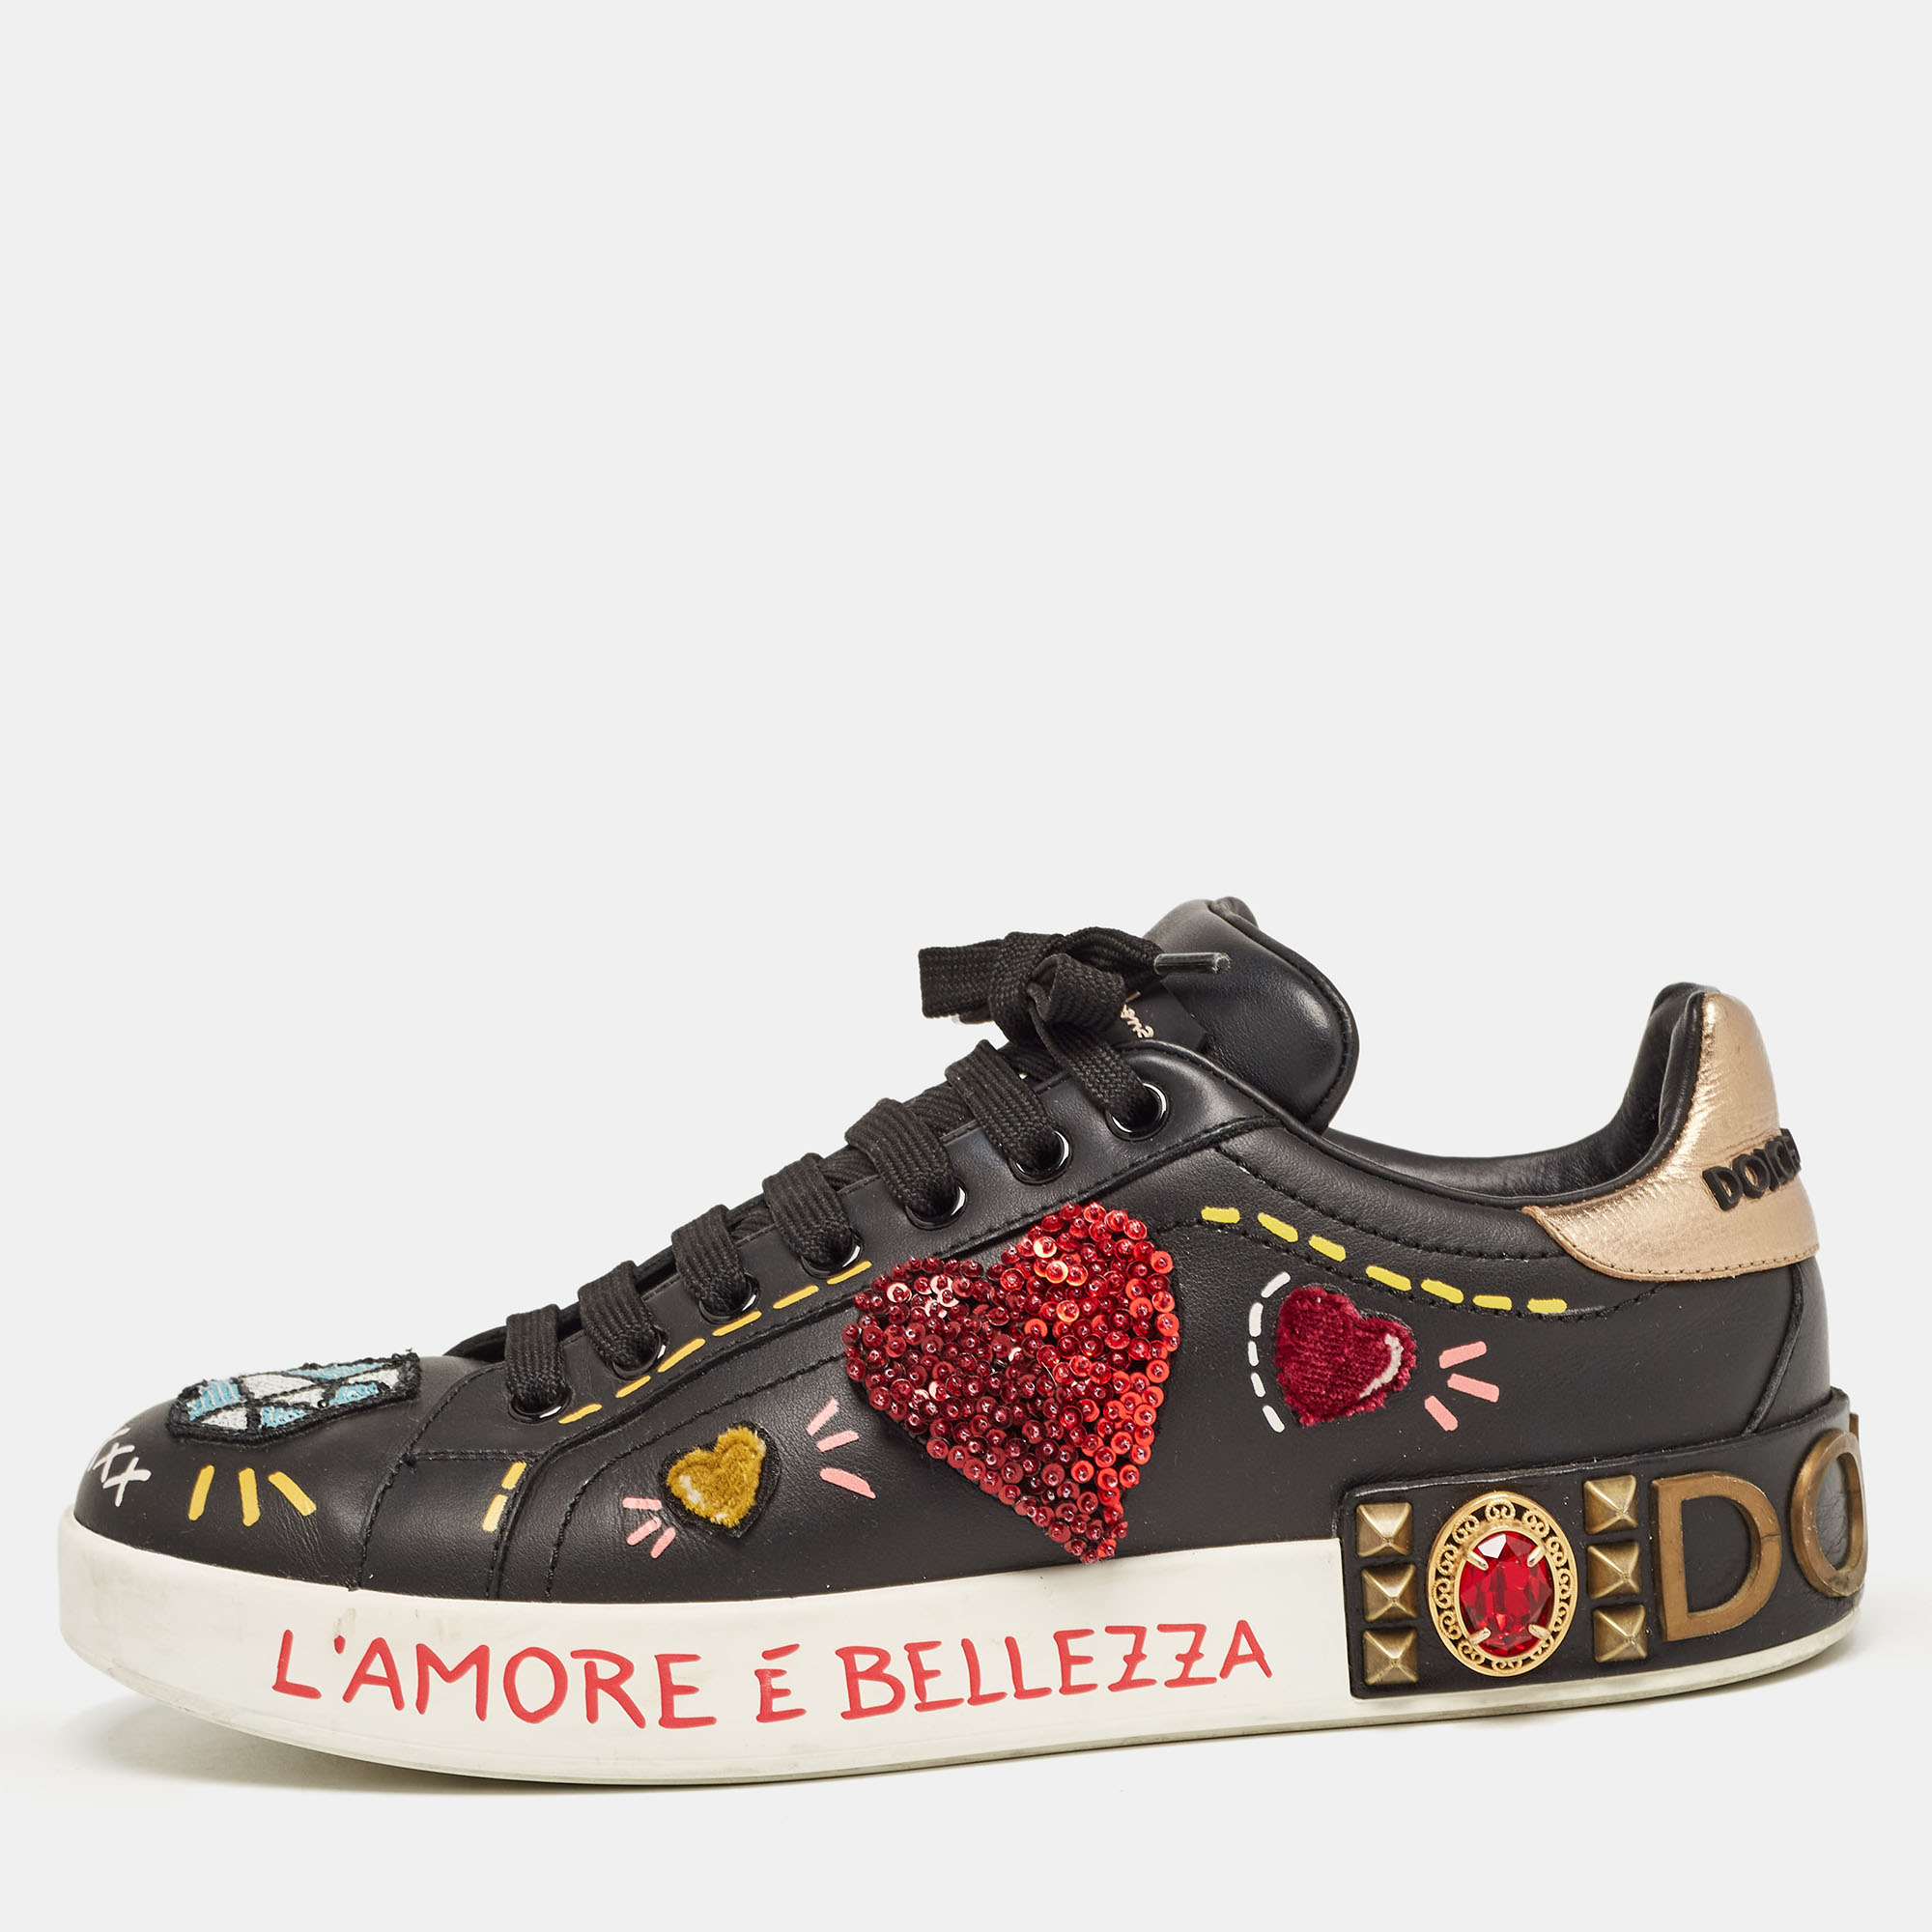 Step into fashion forward luxury with these Dolce and Gabbana sneakers. These premium kicks offer a harmonious blend of style and comfort perfect for those who demand sophistication in every step.